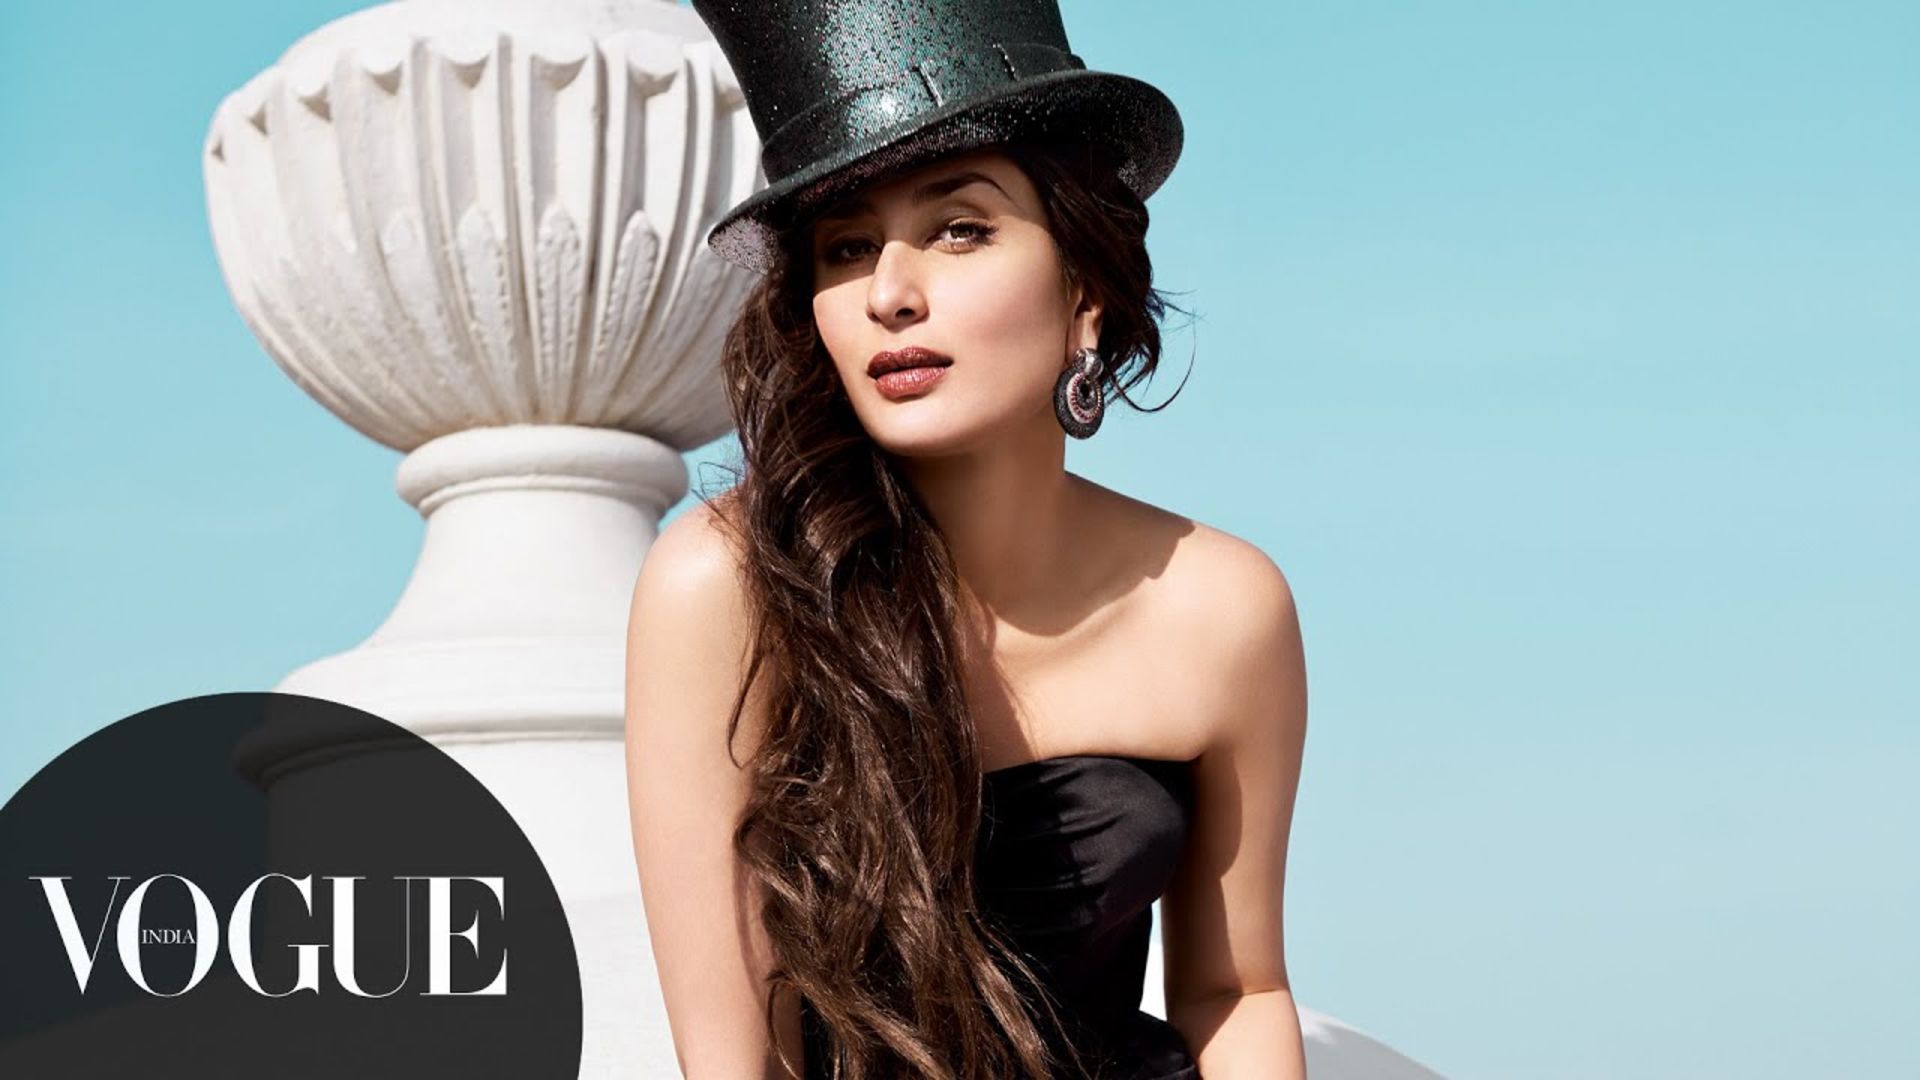 Watch Kareena Kapoor Khan's Sexy Photoshoot for Feburary 2013 Cover | Vogue  February Cover | Vogue India